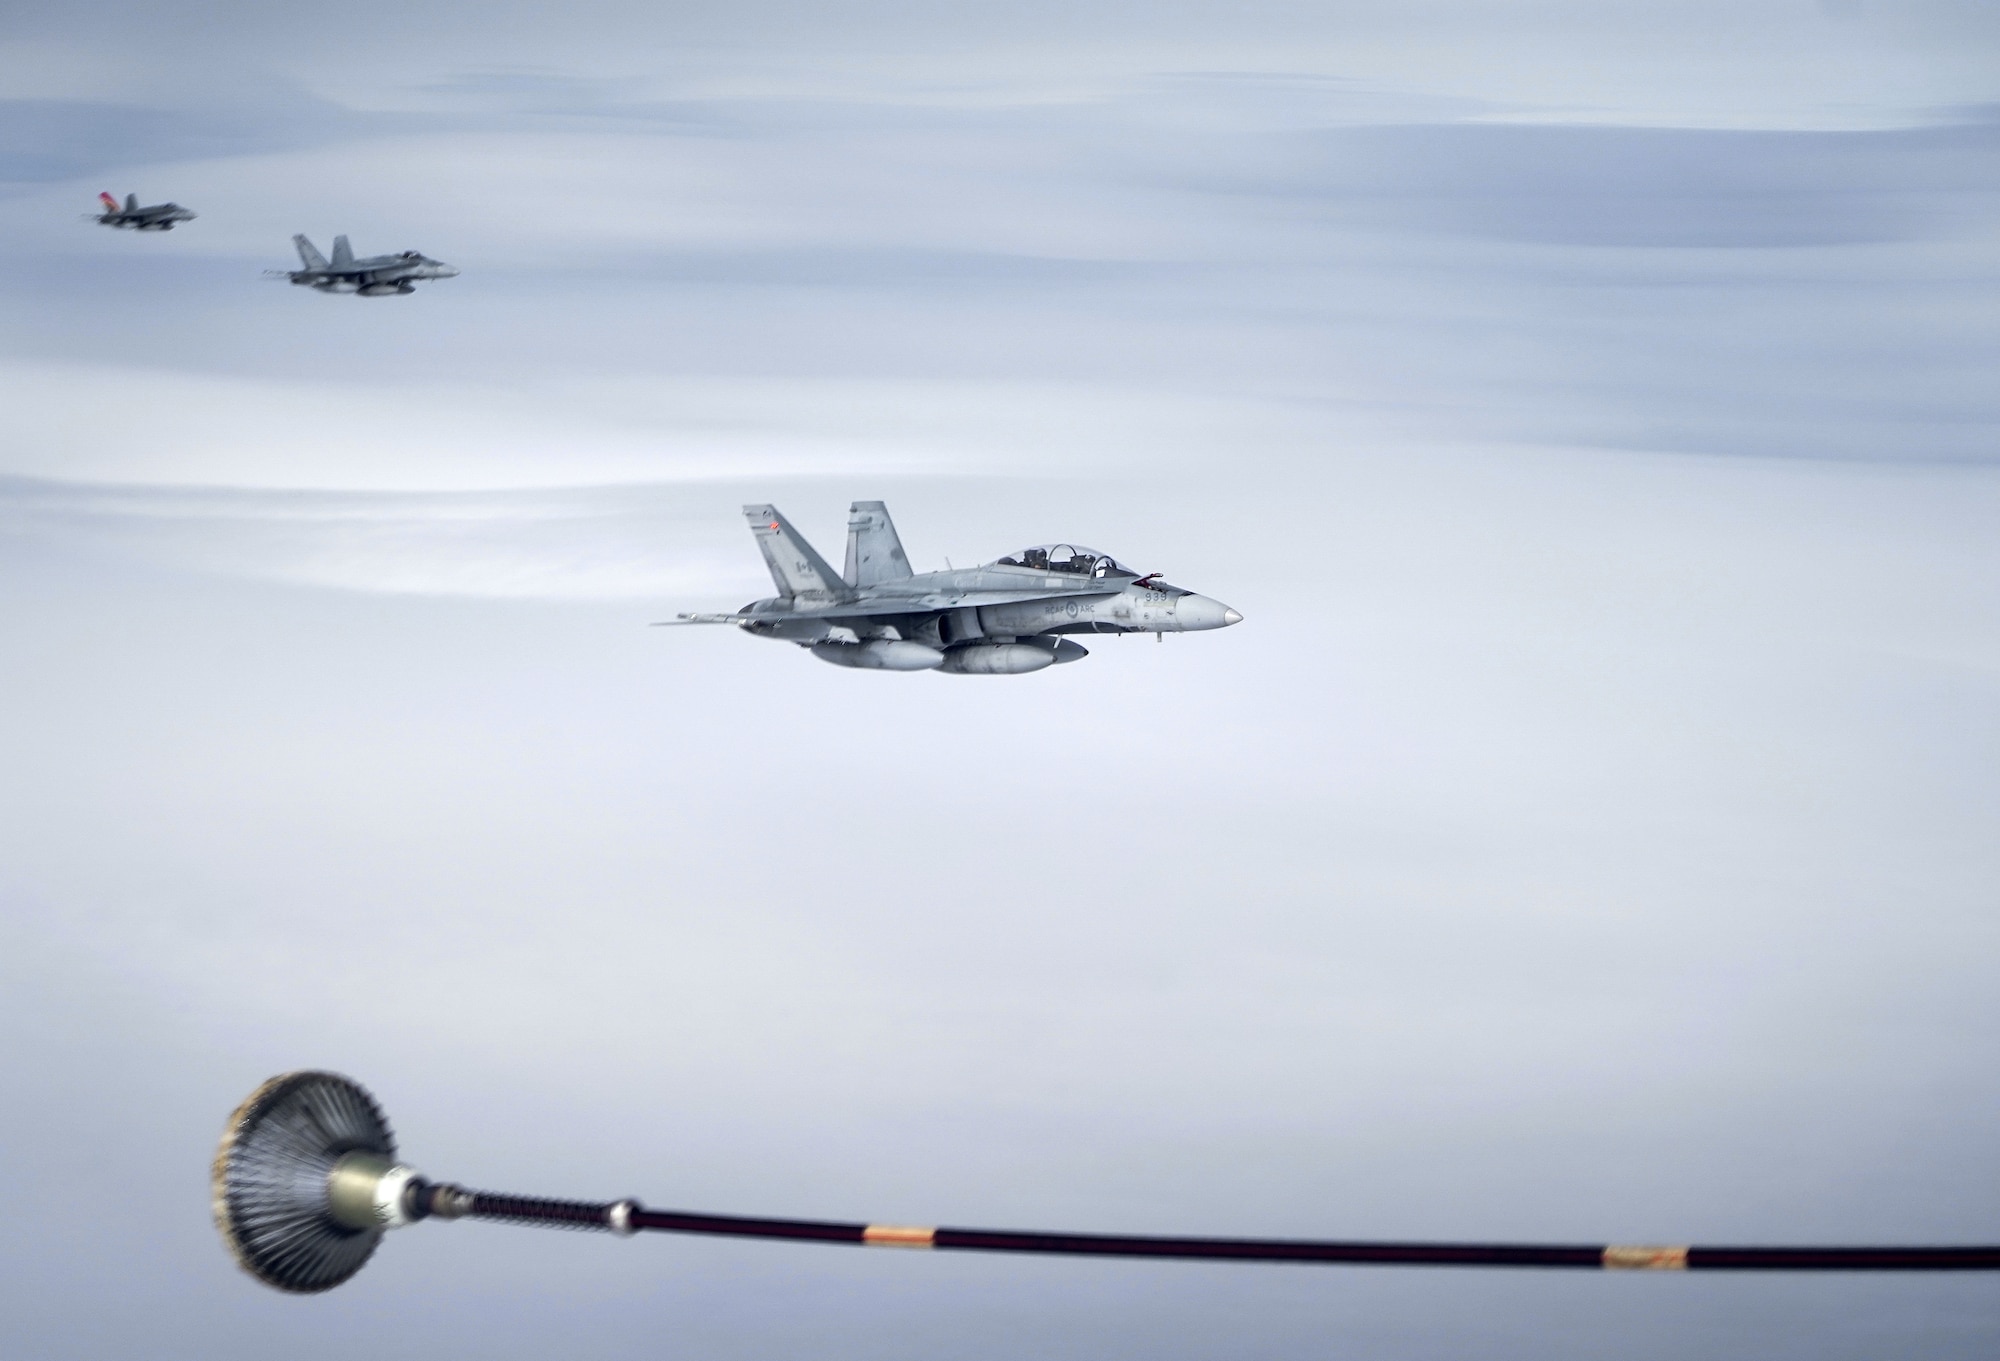 Three Royal Canadian Air Force CF-18 Hornets pull up to a CC-150 Polaris refueling tanker as RCAF Airmen assigned to the 437th Transport Squadron based out of Canadian Forces Base Trenton, Canada, perform refueling operations in training airspace over Alaska during the Red Flag-Alaska 19-3 exercise, Aug. 15, 2019. Red Flag-Alaska, a series of Pacific Air Forces commander-directed field training exercises for U.S. forces, provides joint offensive counter-air, interdiction, close air support, and large force employment training in a simulated combat environment.